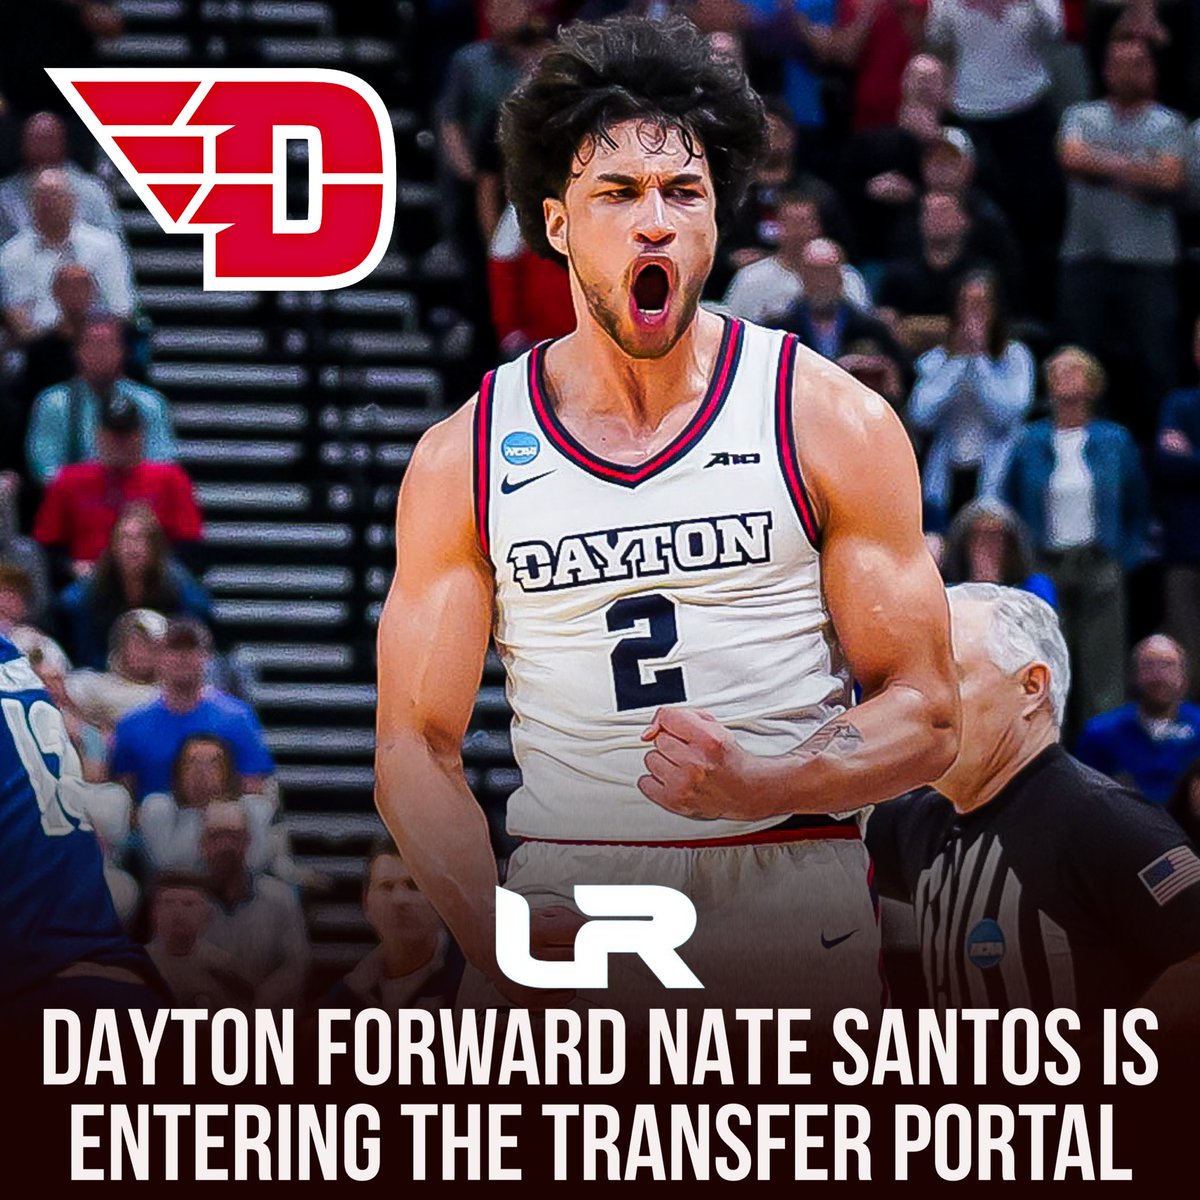 NEWS: Dayton forward Nate Santos is entering the transfer portal, a source tells @LeagueRDY. Santos is a native of Geneva, Illinois who began his career playing two seasons at Pitt before playing one at Dayton. Started all 33 games played this season. He averaged 11.7PPG,…